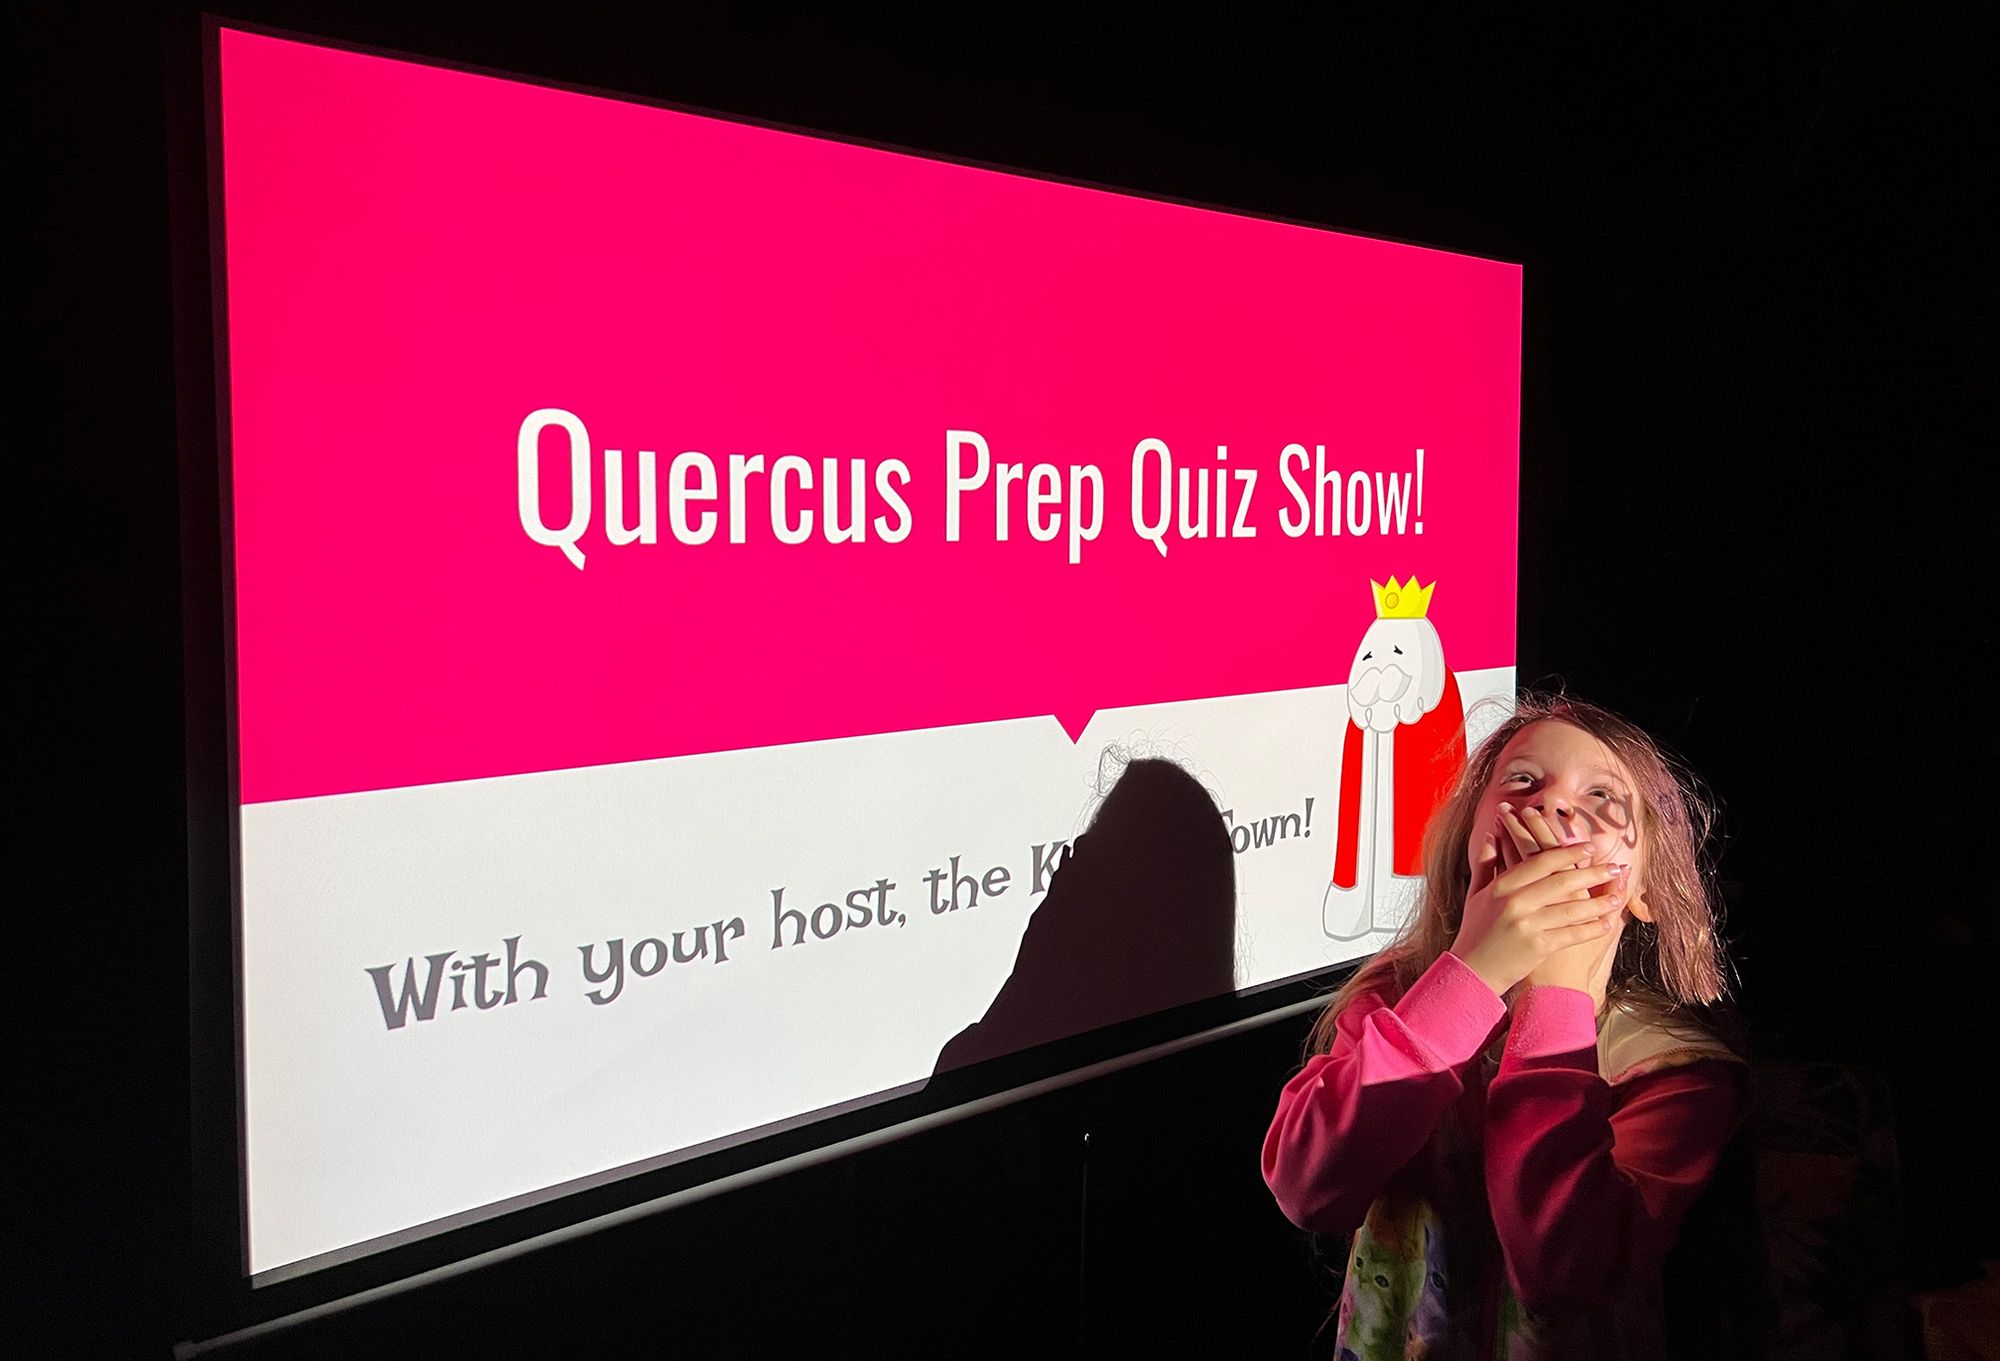 Wanda has her hands clasped over her joyfully agape mouth, in front of the Quiz Show intro slide.